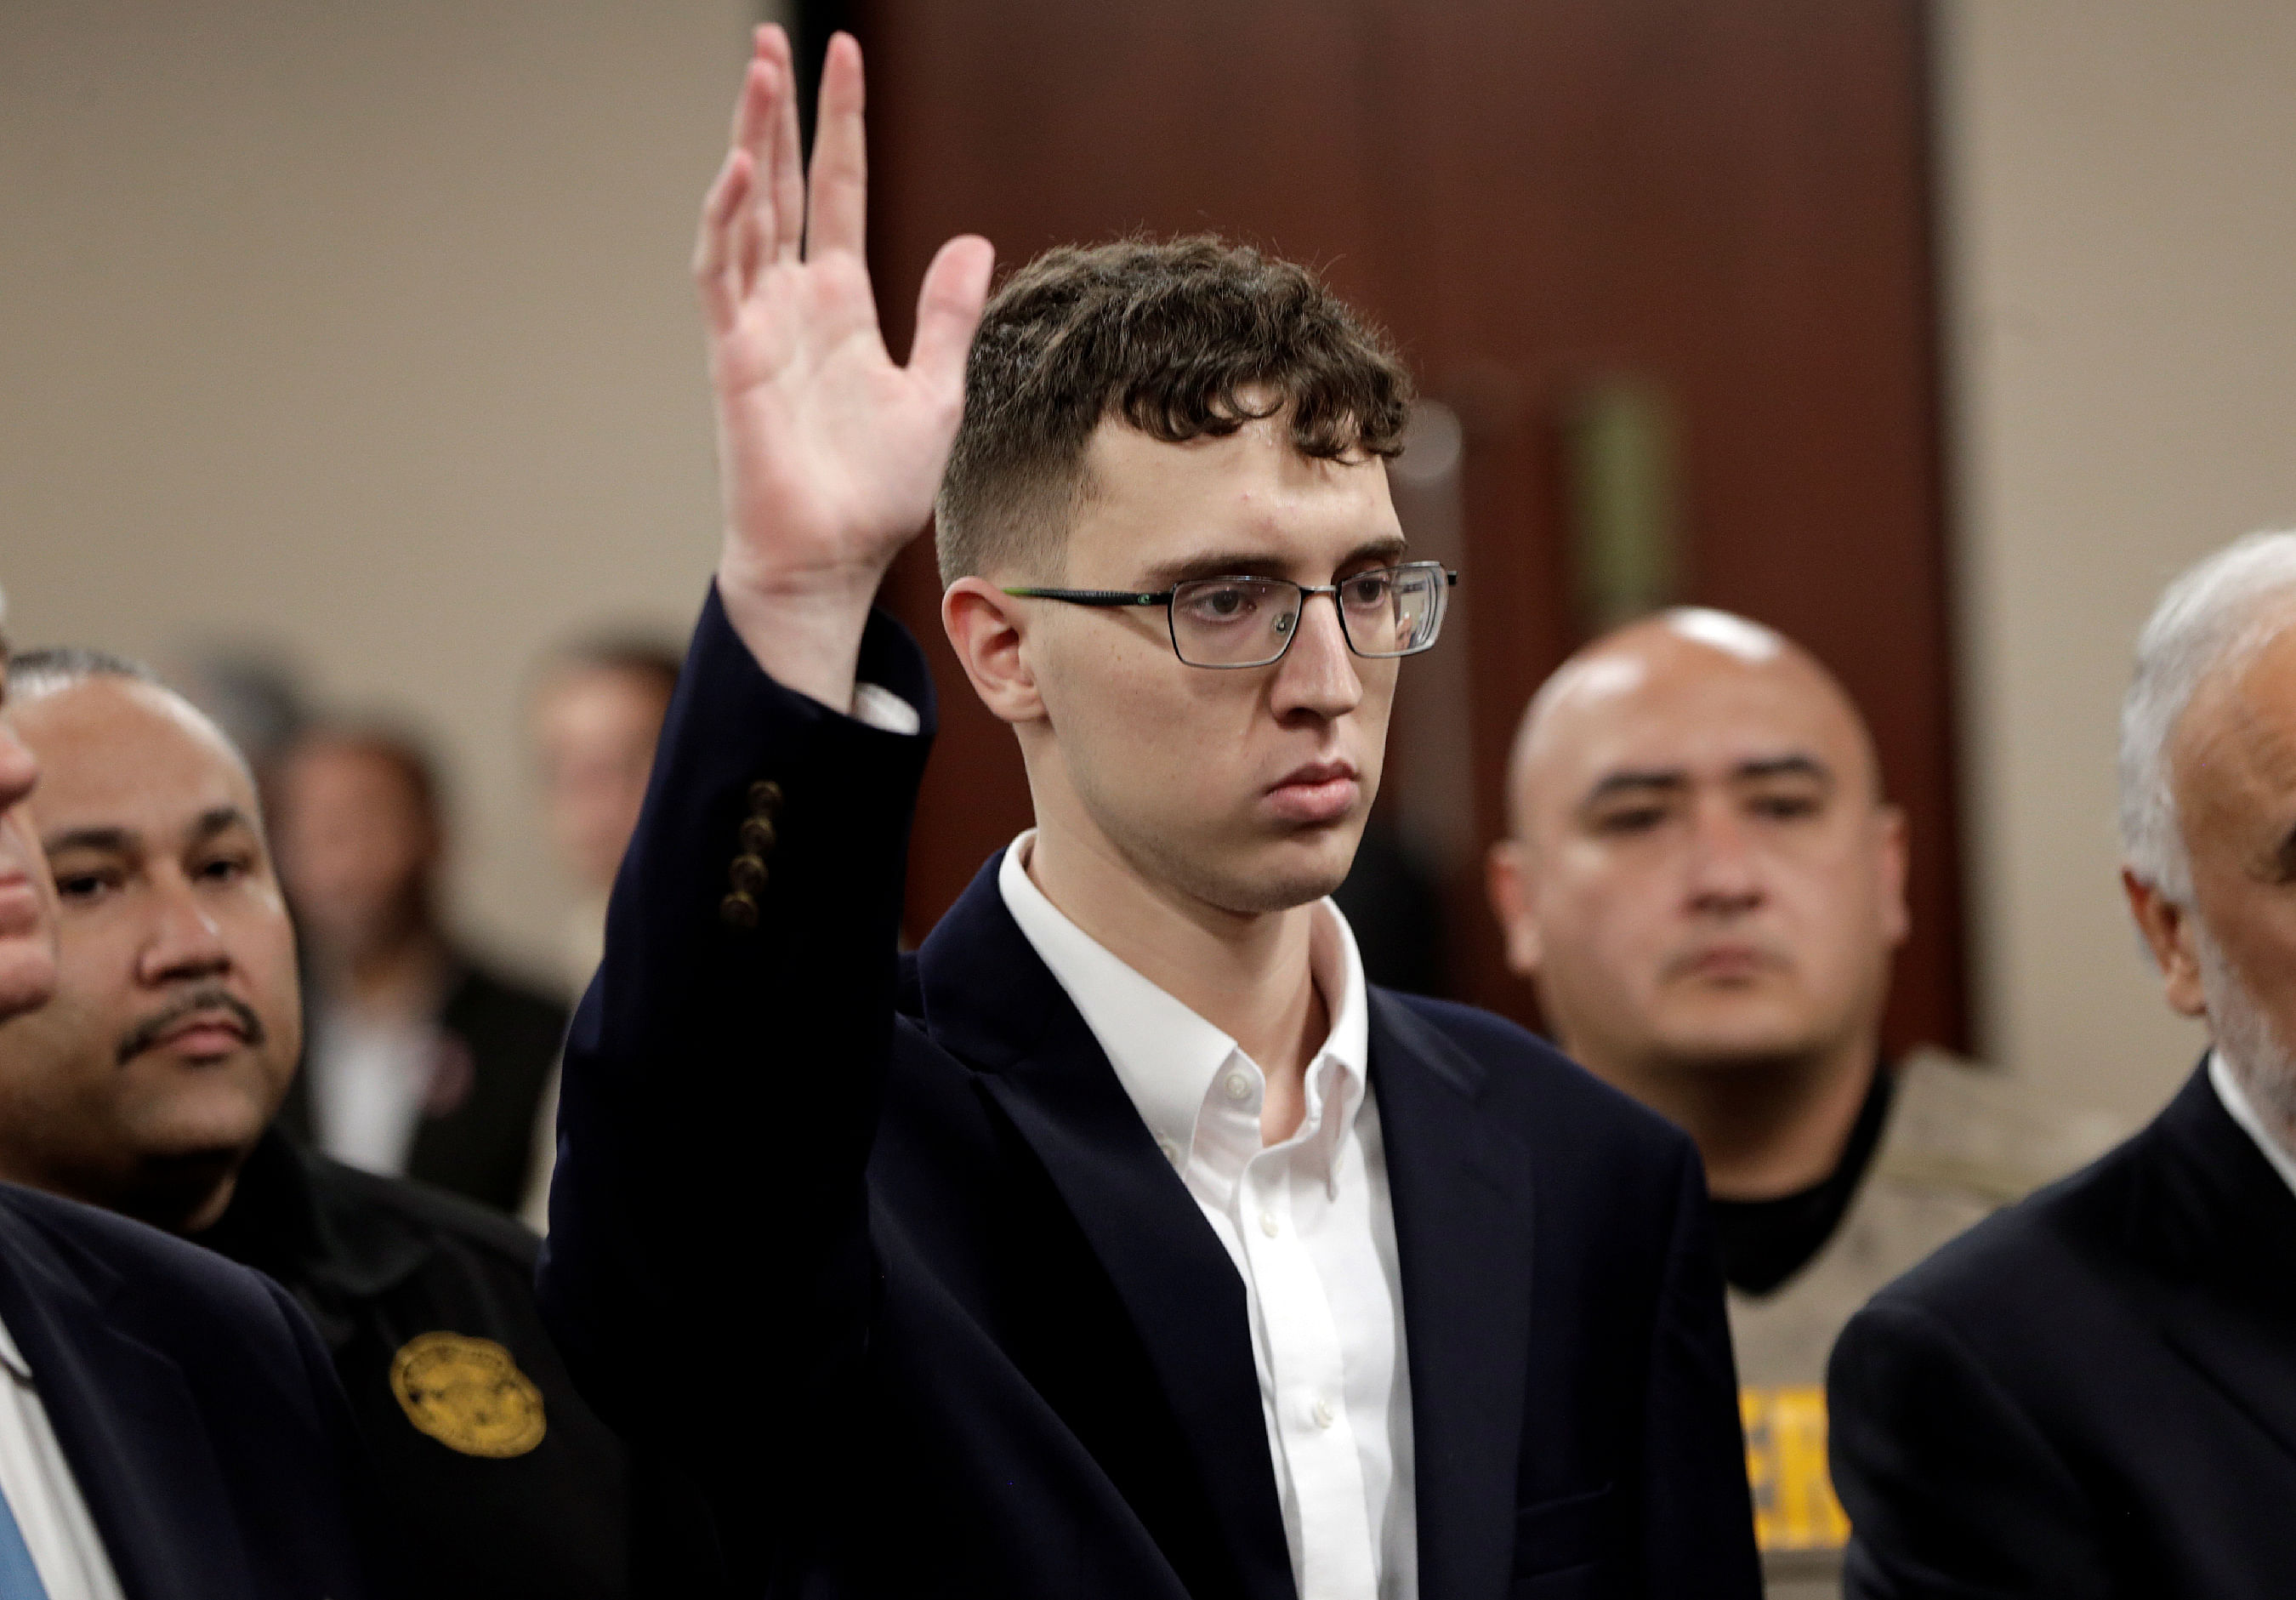 El Paso Walmart mass shooter Patrick Crusius, a 21-year-old male from Allen, Texas, accused of killing 22 and injuring 25, is arraigned, in El Paso, Texas, U.S. (Reuters Photo)